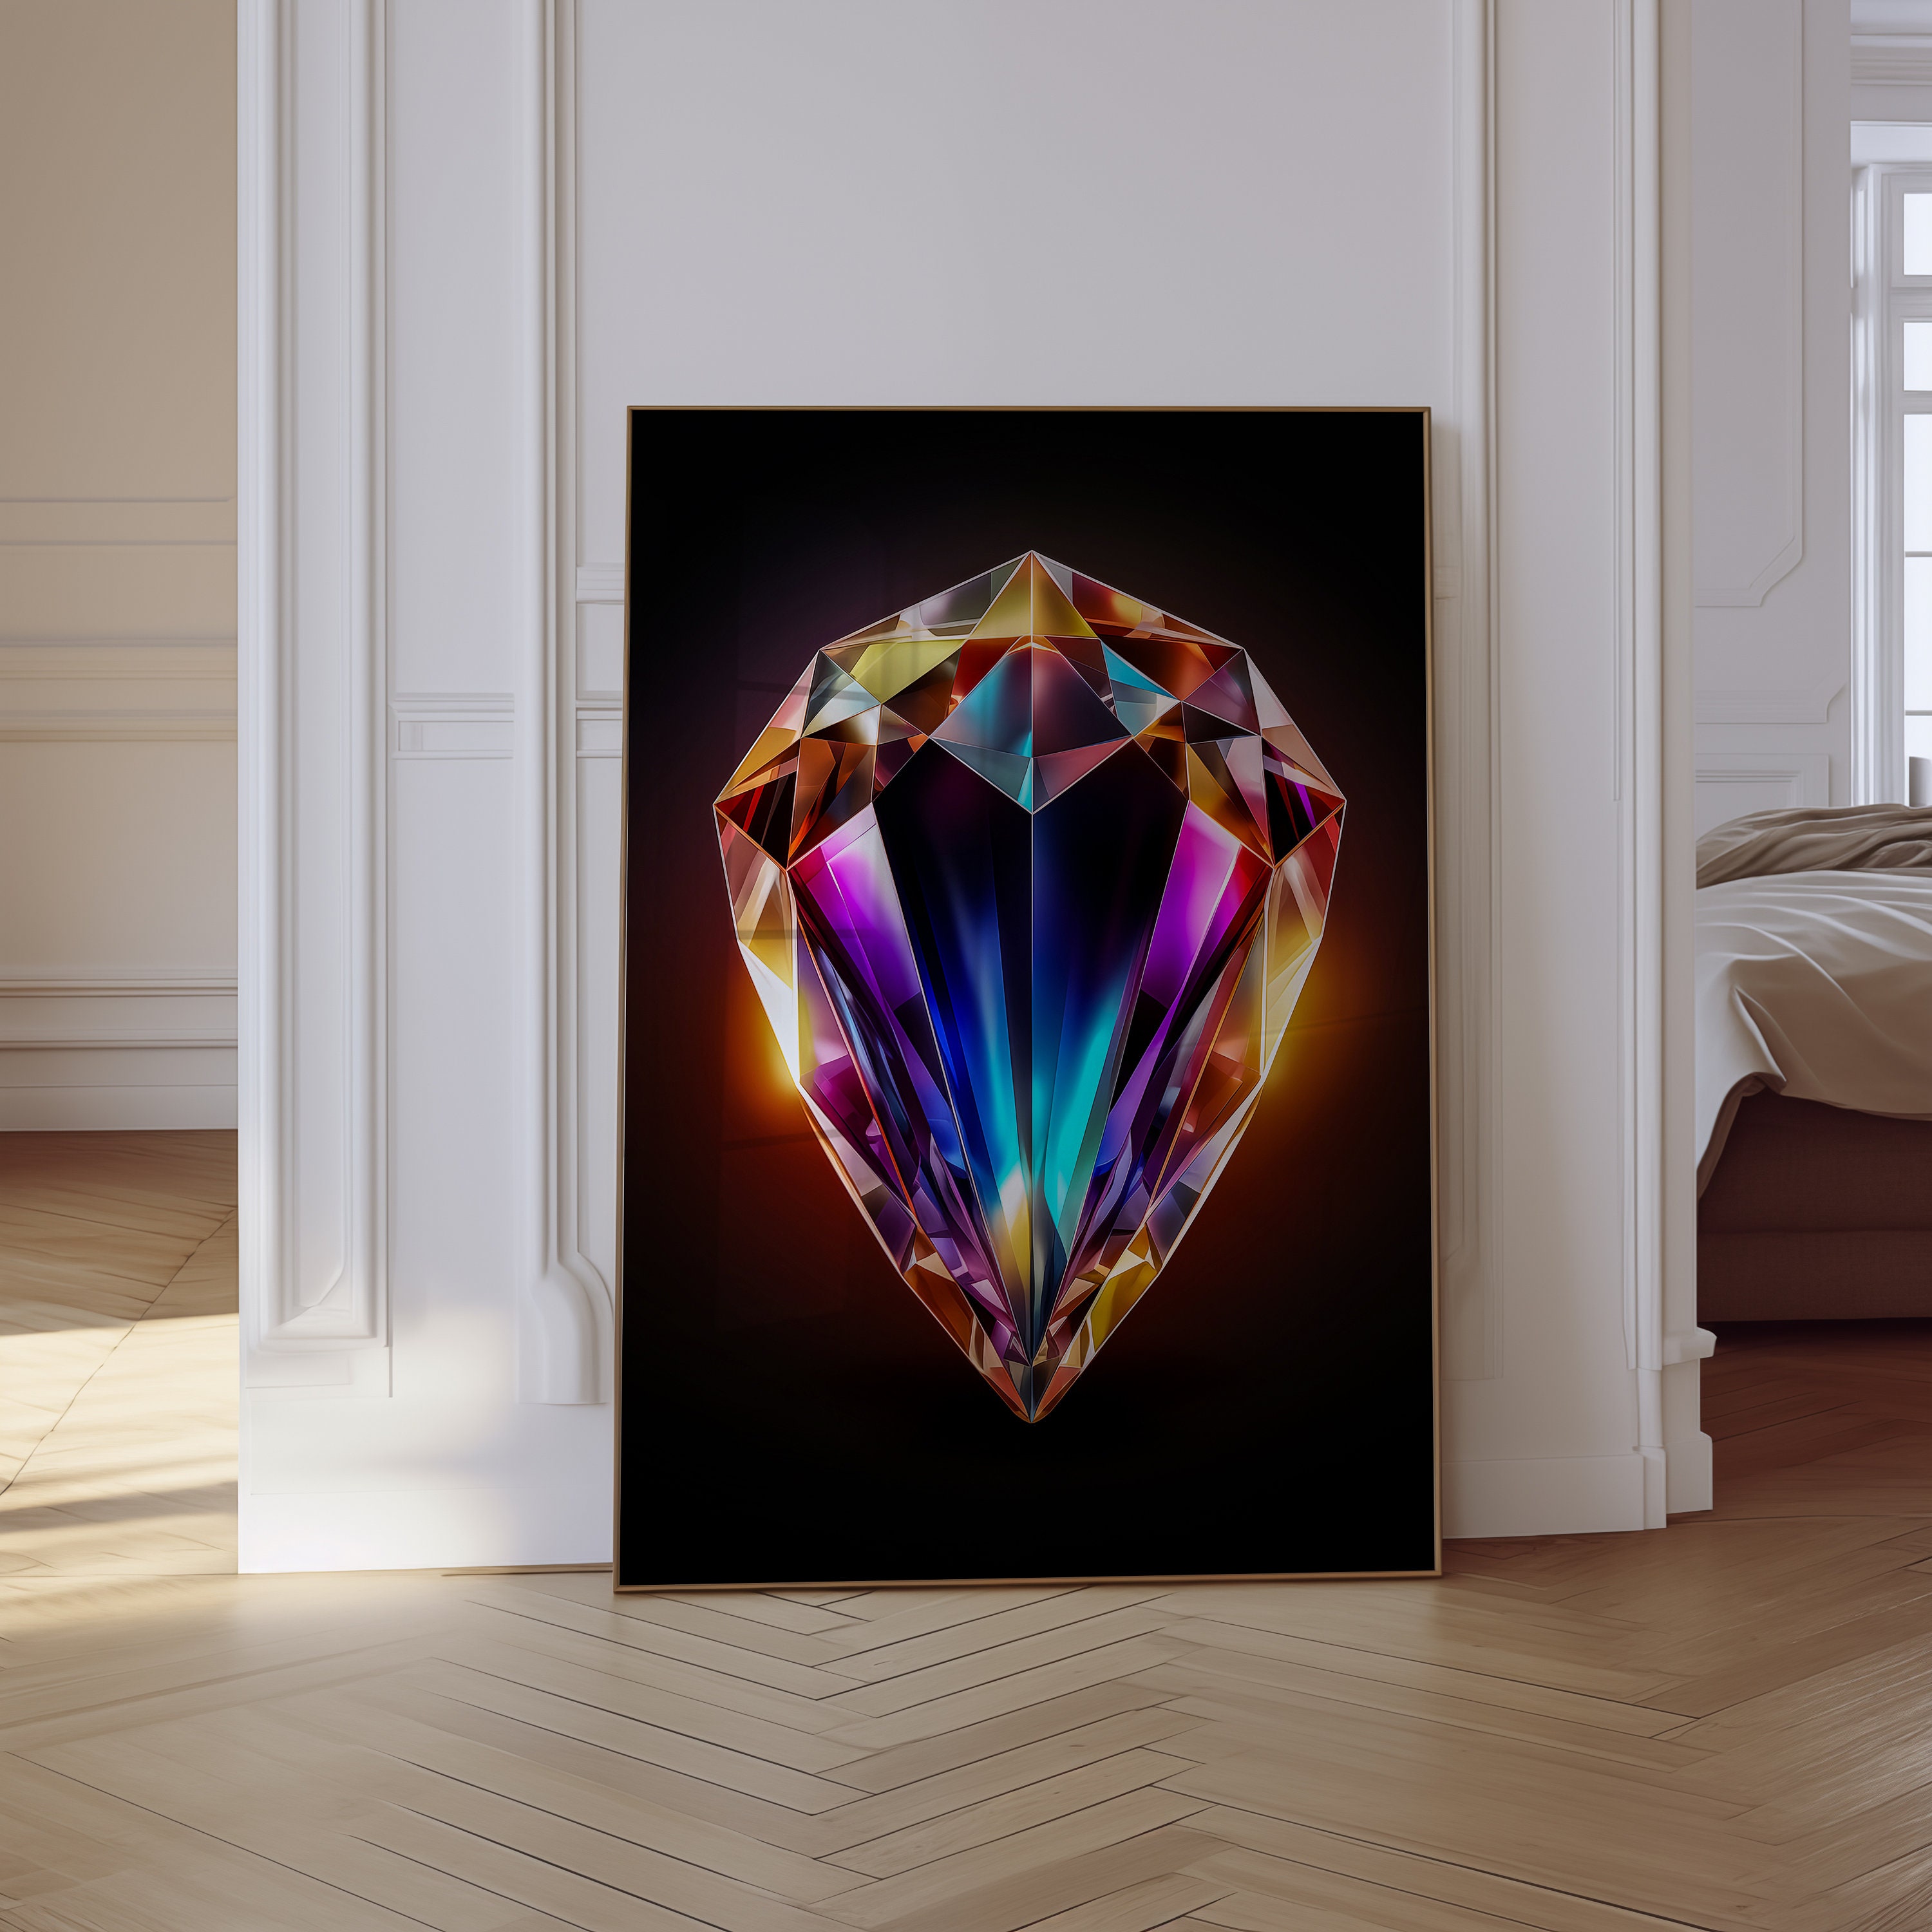 Diamond Art Kits for Adults Beginners Kids, Wall Painting, DIY Full Drill  Diamond Painting Kits with Gem Crystal Home Wall Decor 12x16 Inch A13 